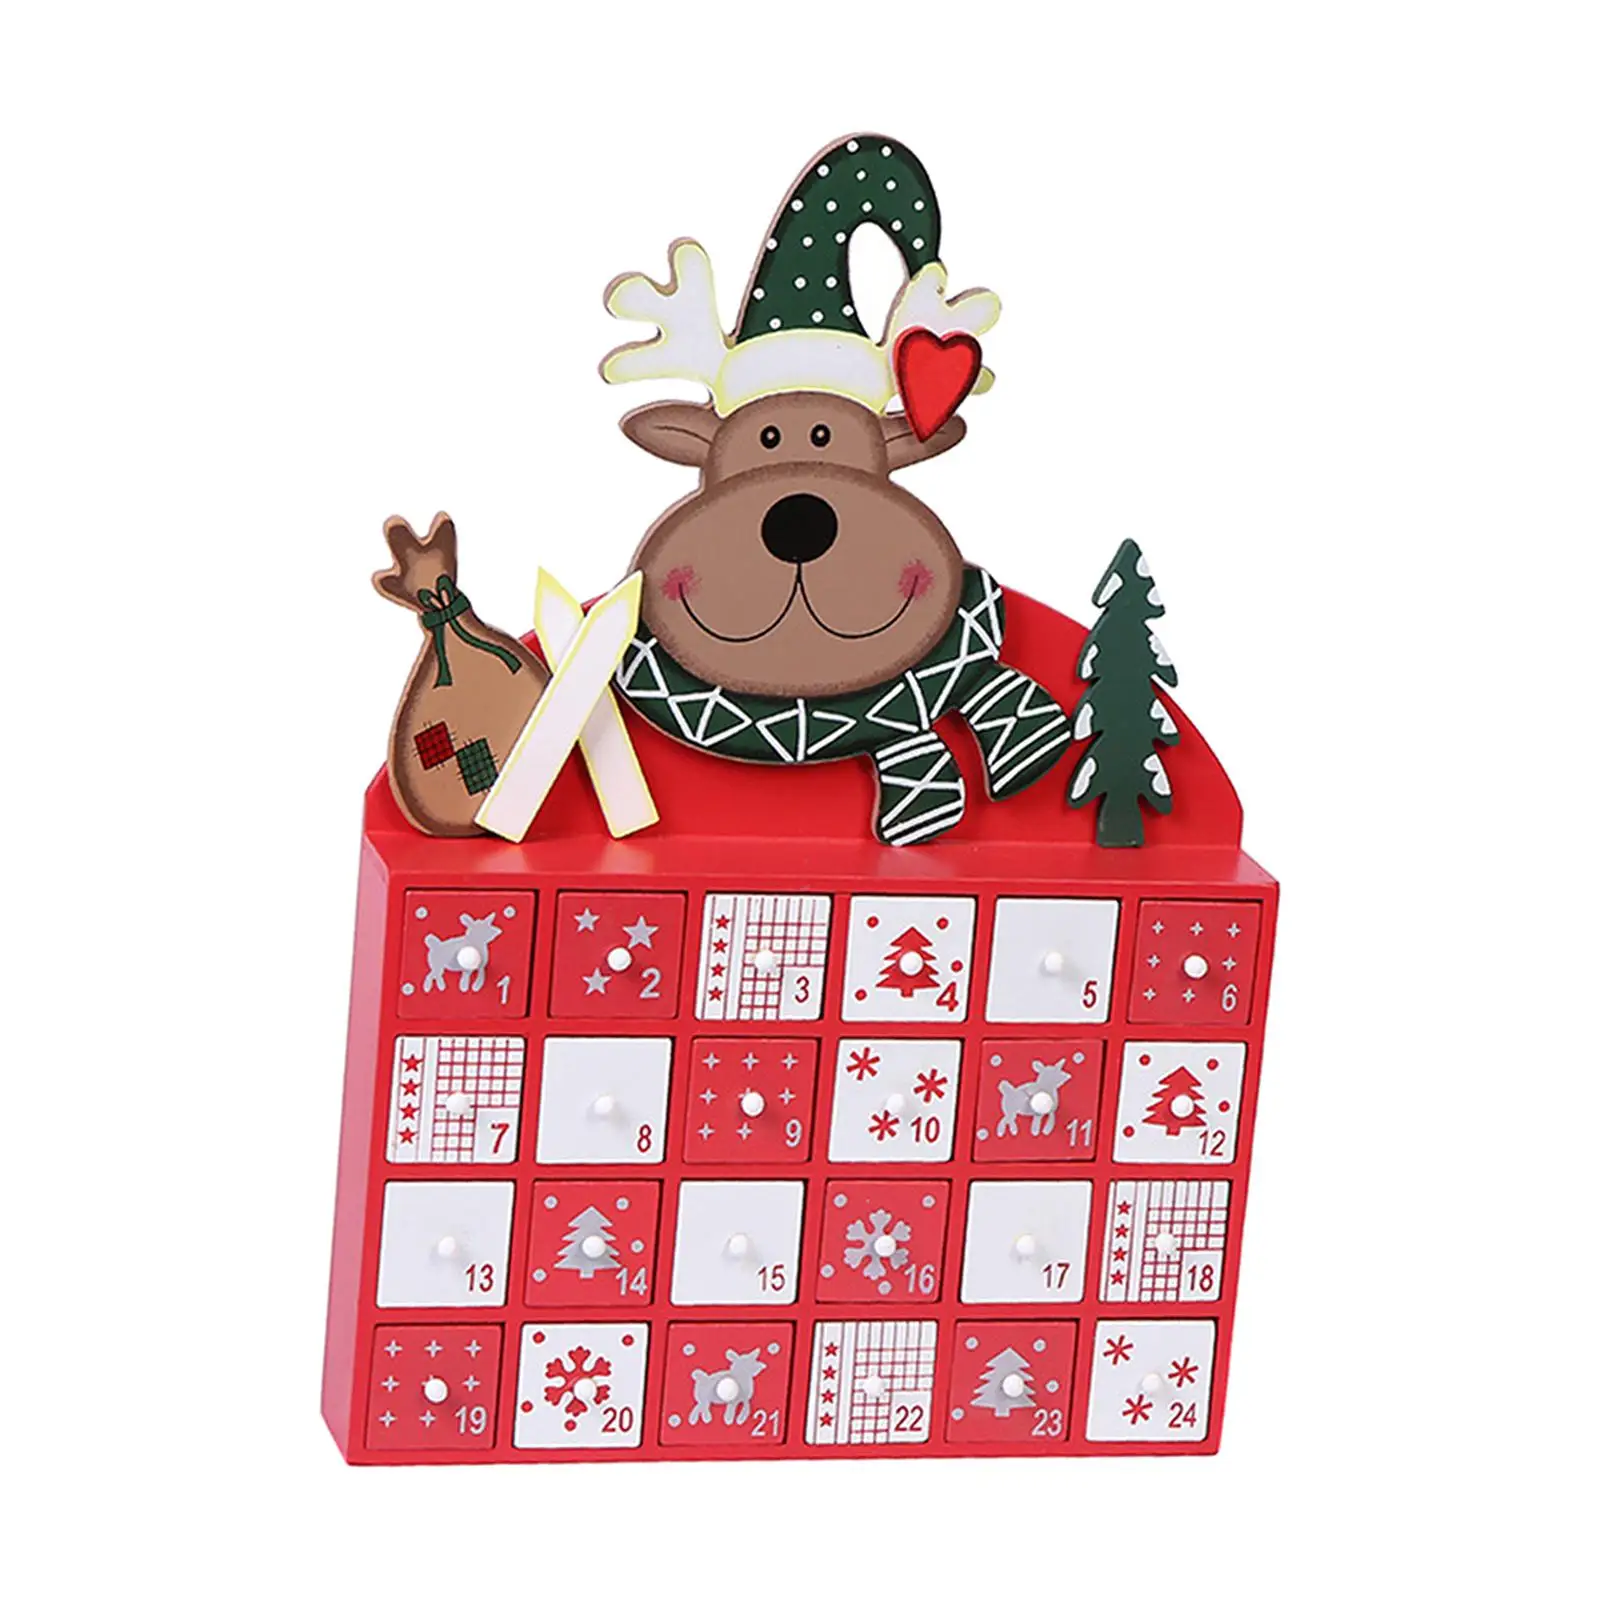 Wooden Calendar Box Reindeer Pattern with Storage Drawers Candy Organizer Fillable for Holiday Desktop Home Tabletop Ornaments